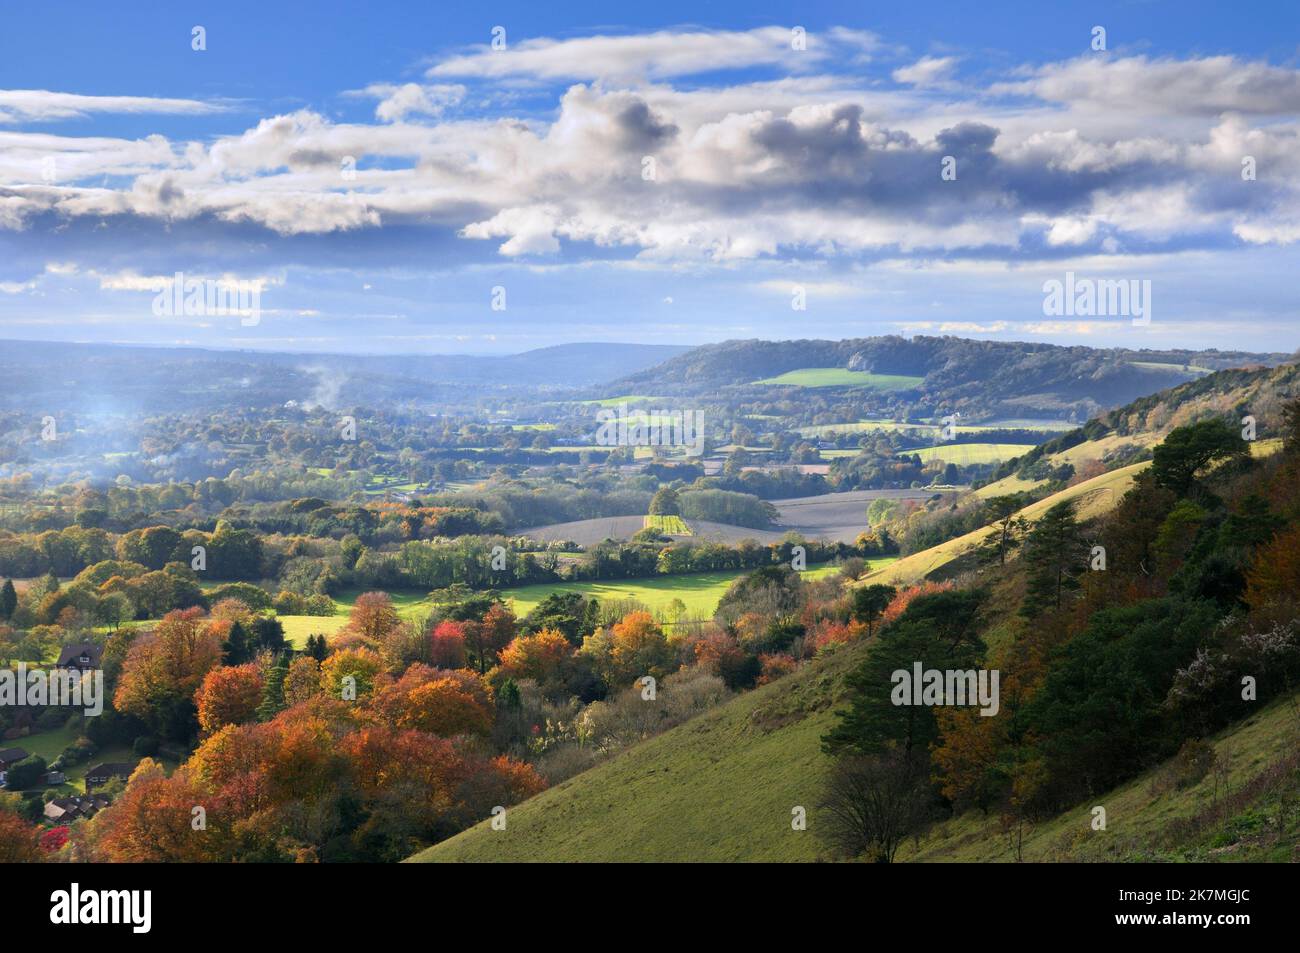 View from Colley Hill looking across Surrey Hills countryside in sunshine with trees in autumn colour, Reigate, North Downs Way, Surrey, England, UK Stock Photo